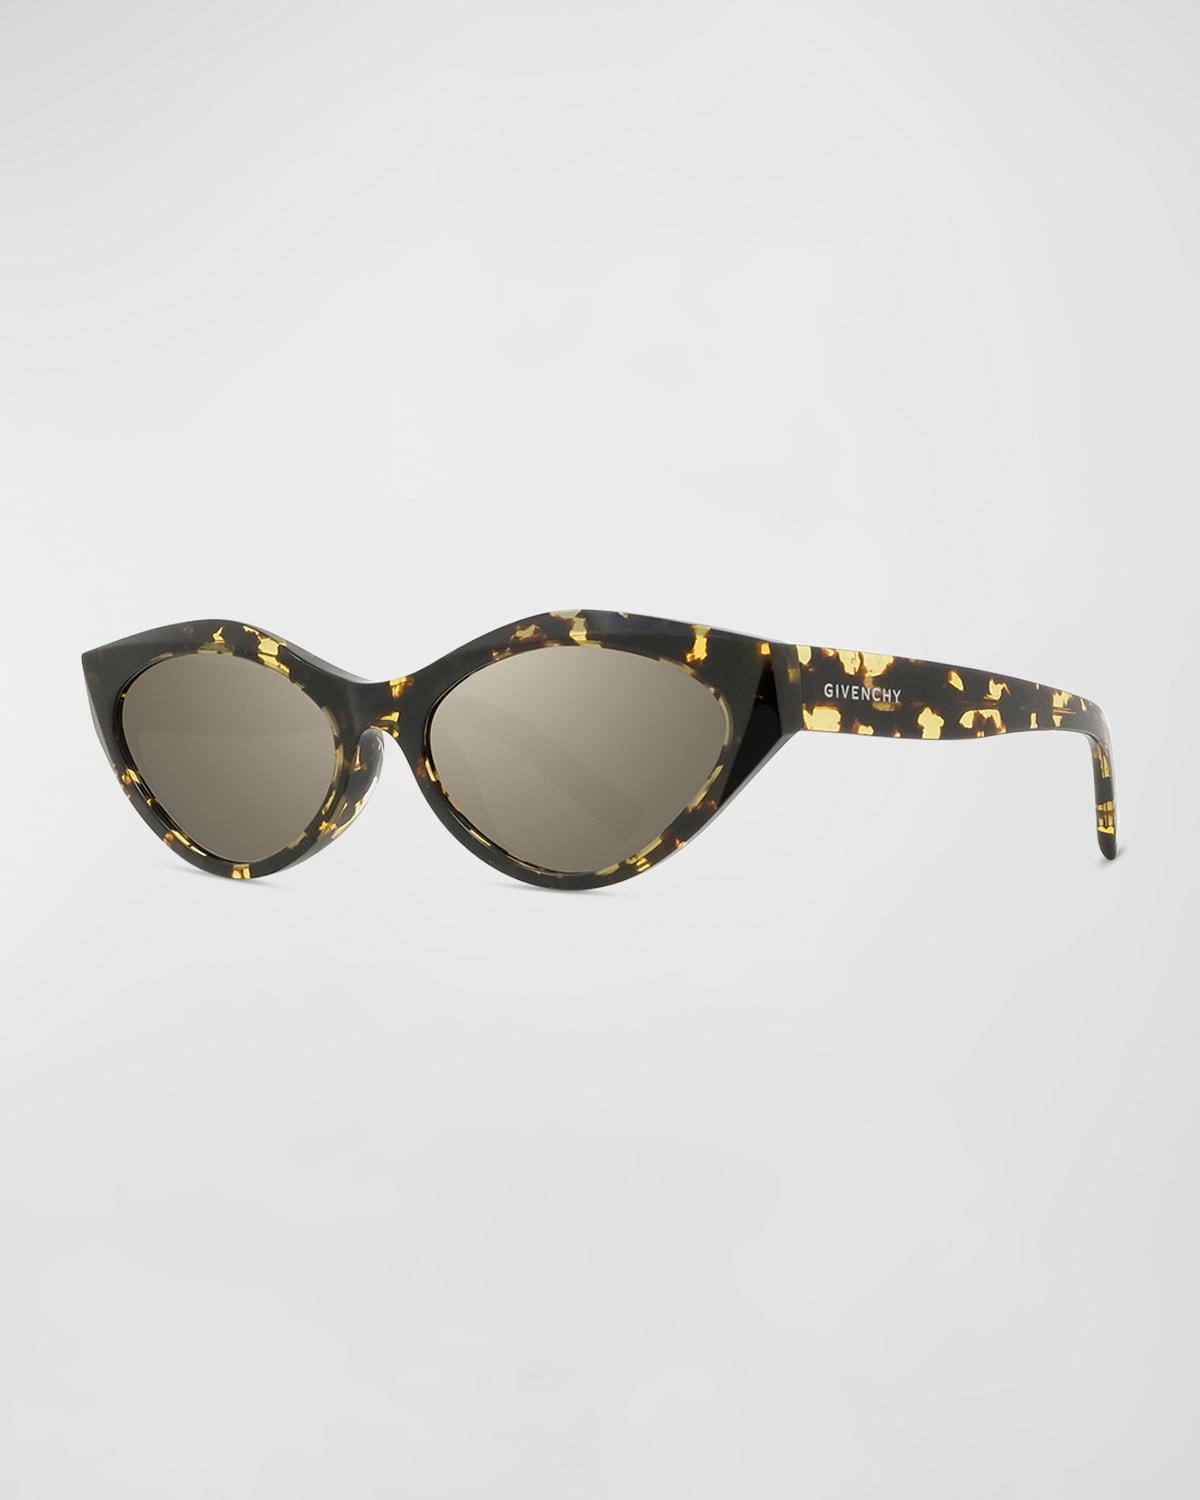 GIVENCHY MIRRORED ACETATE CAT-EYE SUNGLASSES